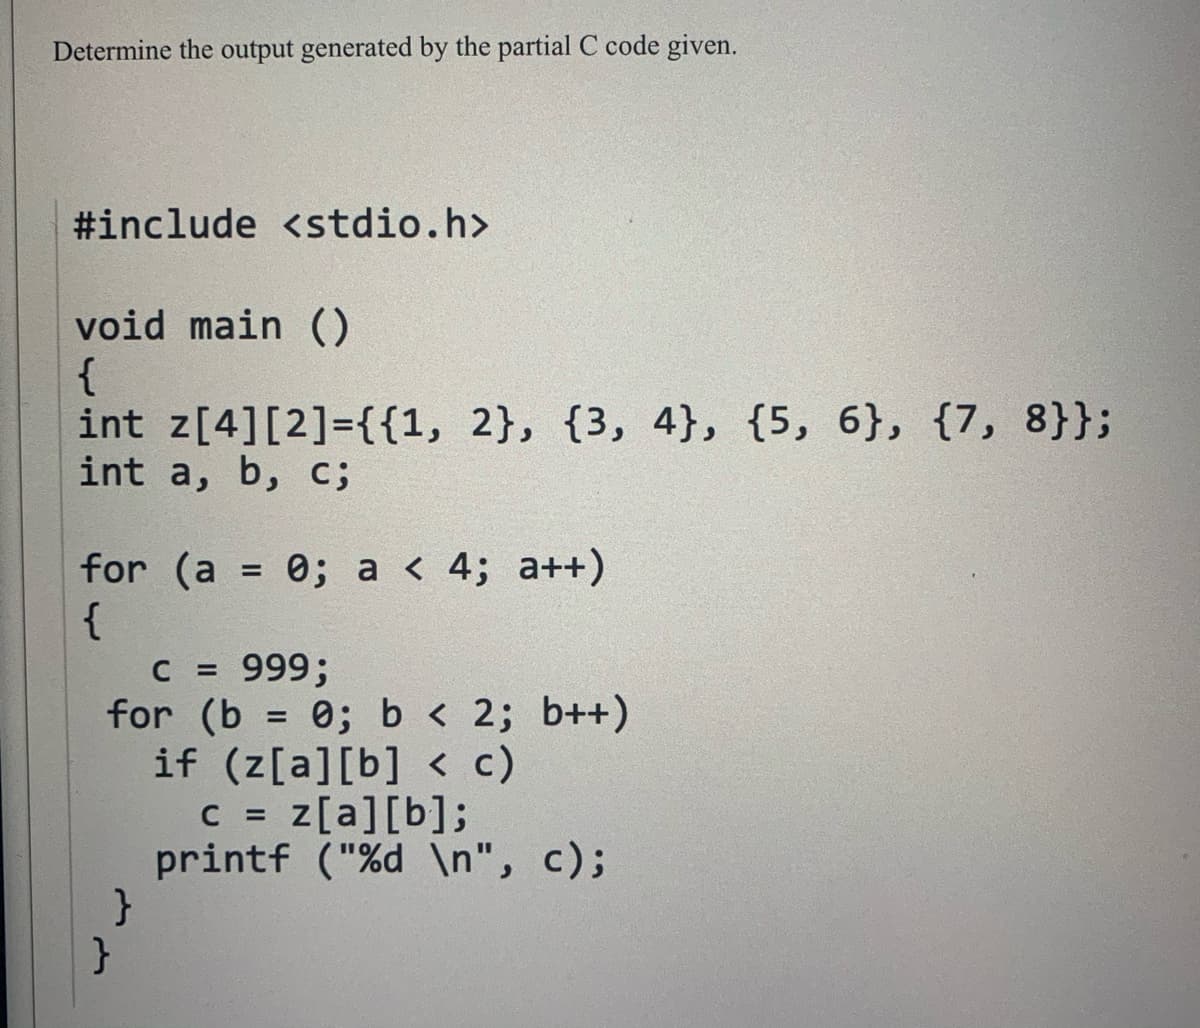 Determine the output generated by the partial C code given.
#include <stdio.h>
void main ()
{
int z[4][2]={{1, 2}, {3, 4}, {5, 6}, {7, 8}};
int a, b, c;
for (a = 0; a < 4; a++)
{
C = 999;
for (b = 0; b < 2; b++)
if (z[a][b] < c)
C = z[a][b];
printf ("%d \n", c);
}
%D
%D
